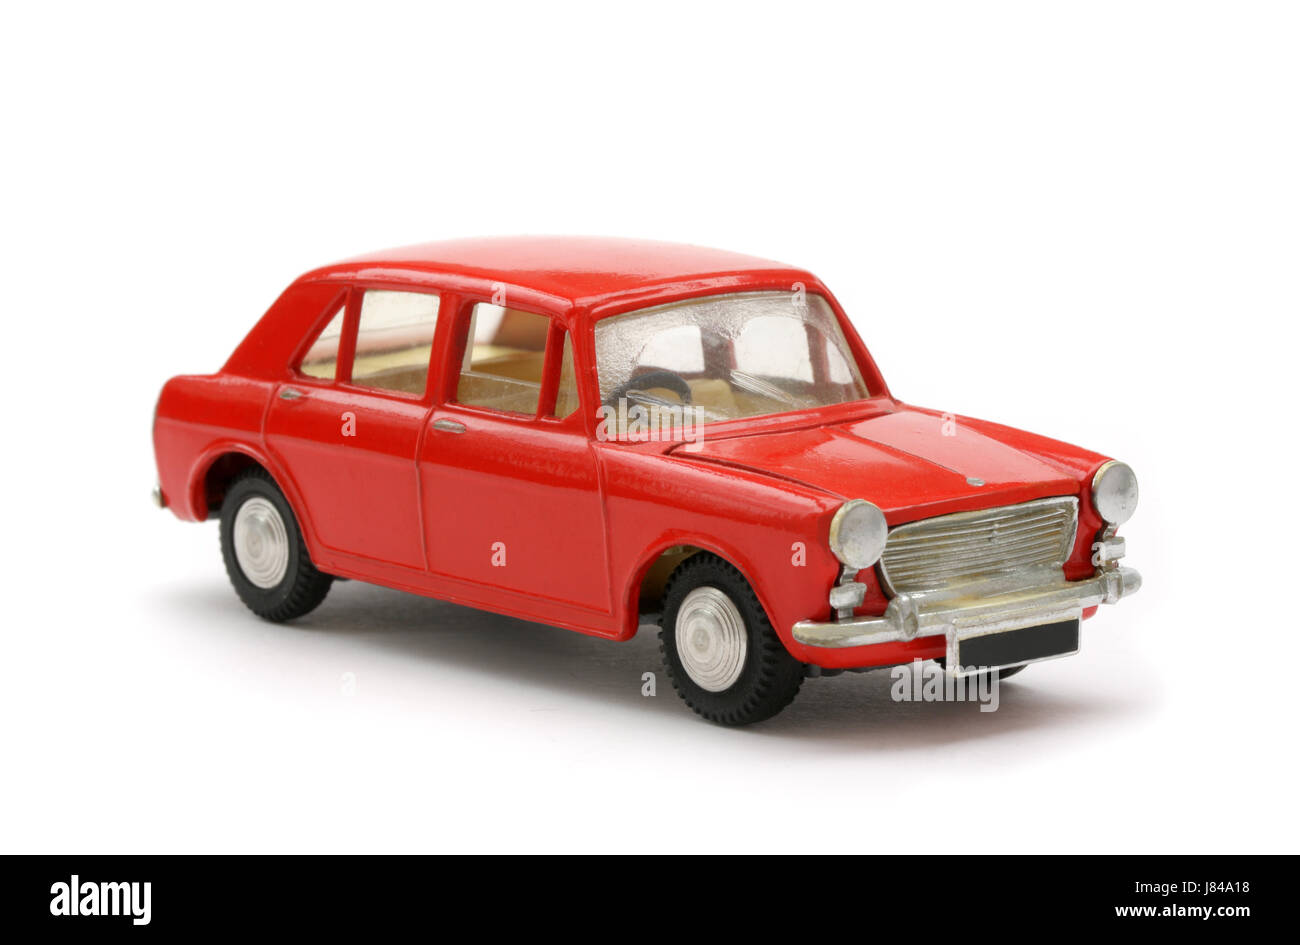 car automobile vehicle means of travel motor vehicle toy retro red model game Stock Photo